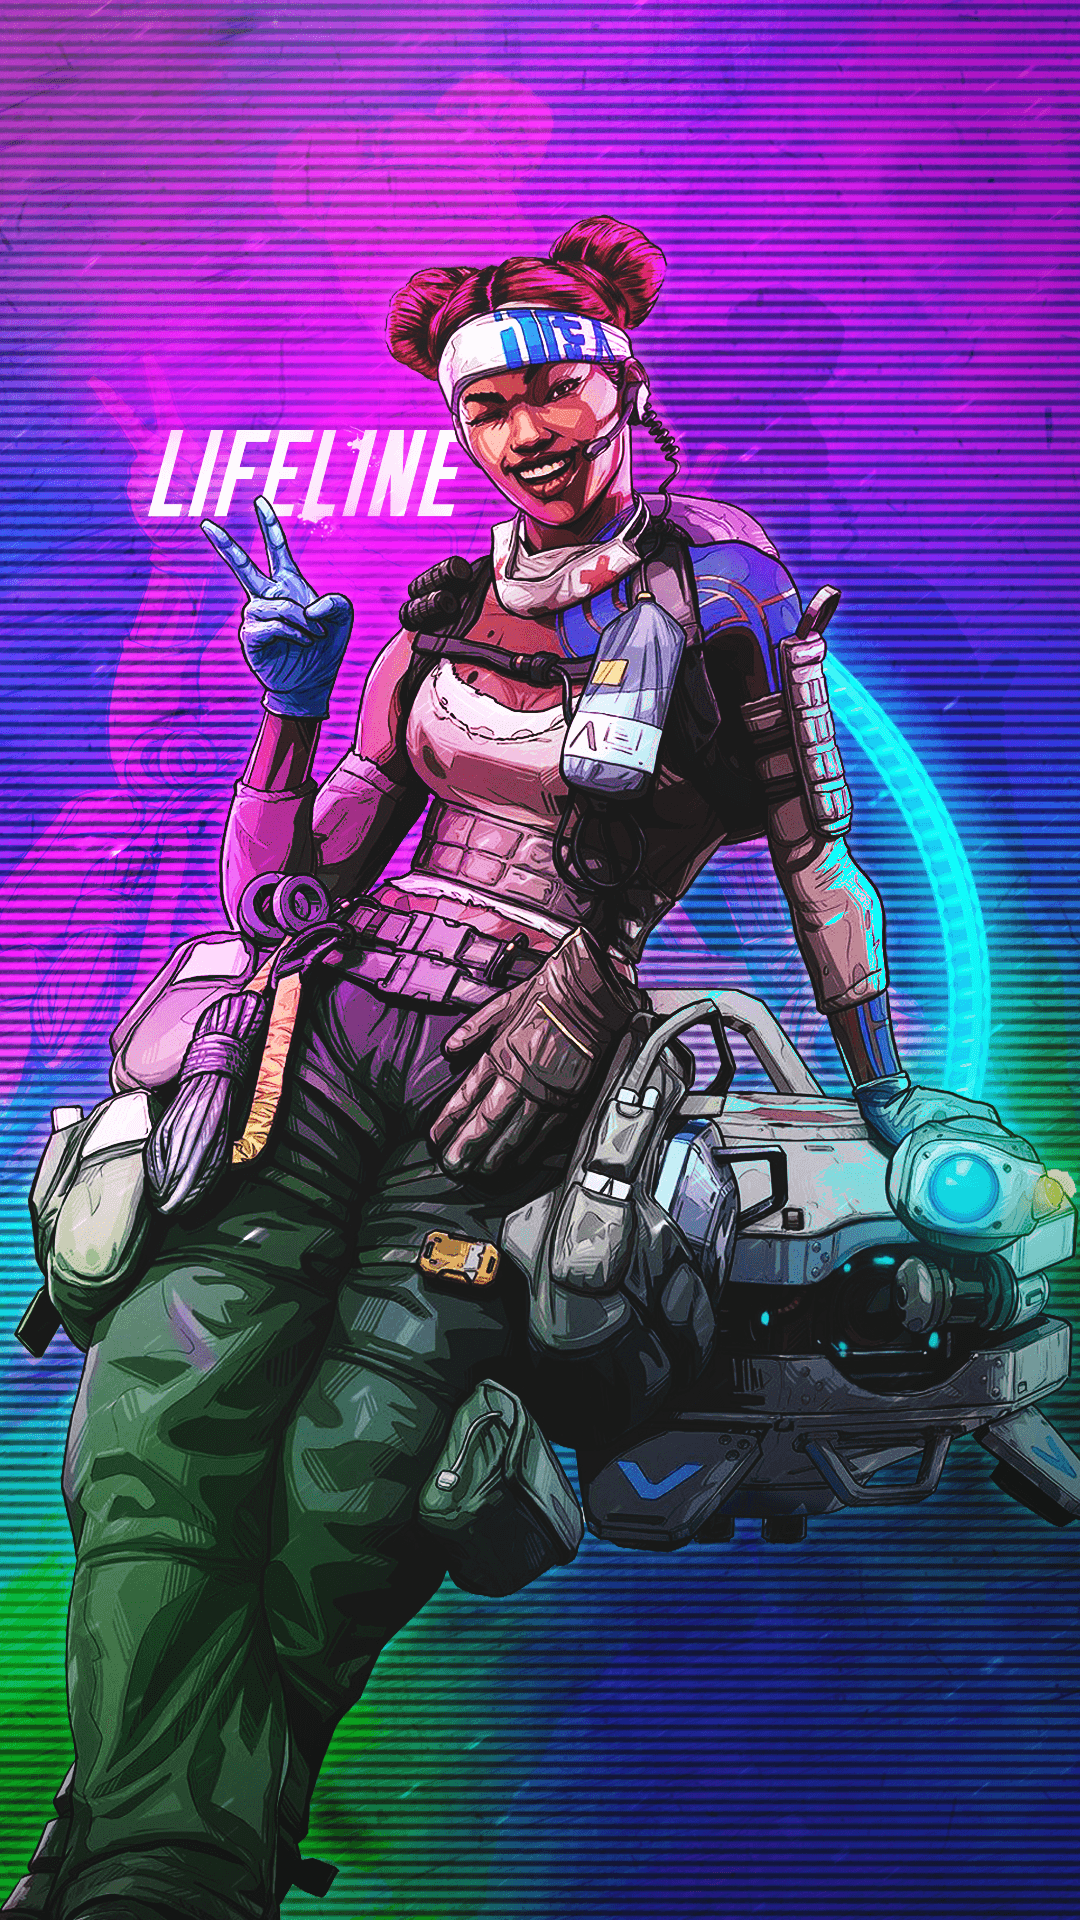 Heres the lifeline phone wallpaper, thank you all so much